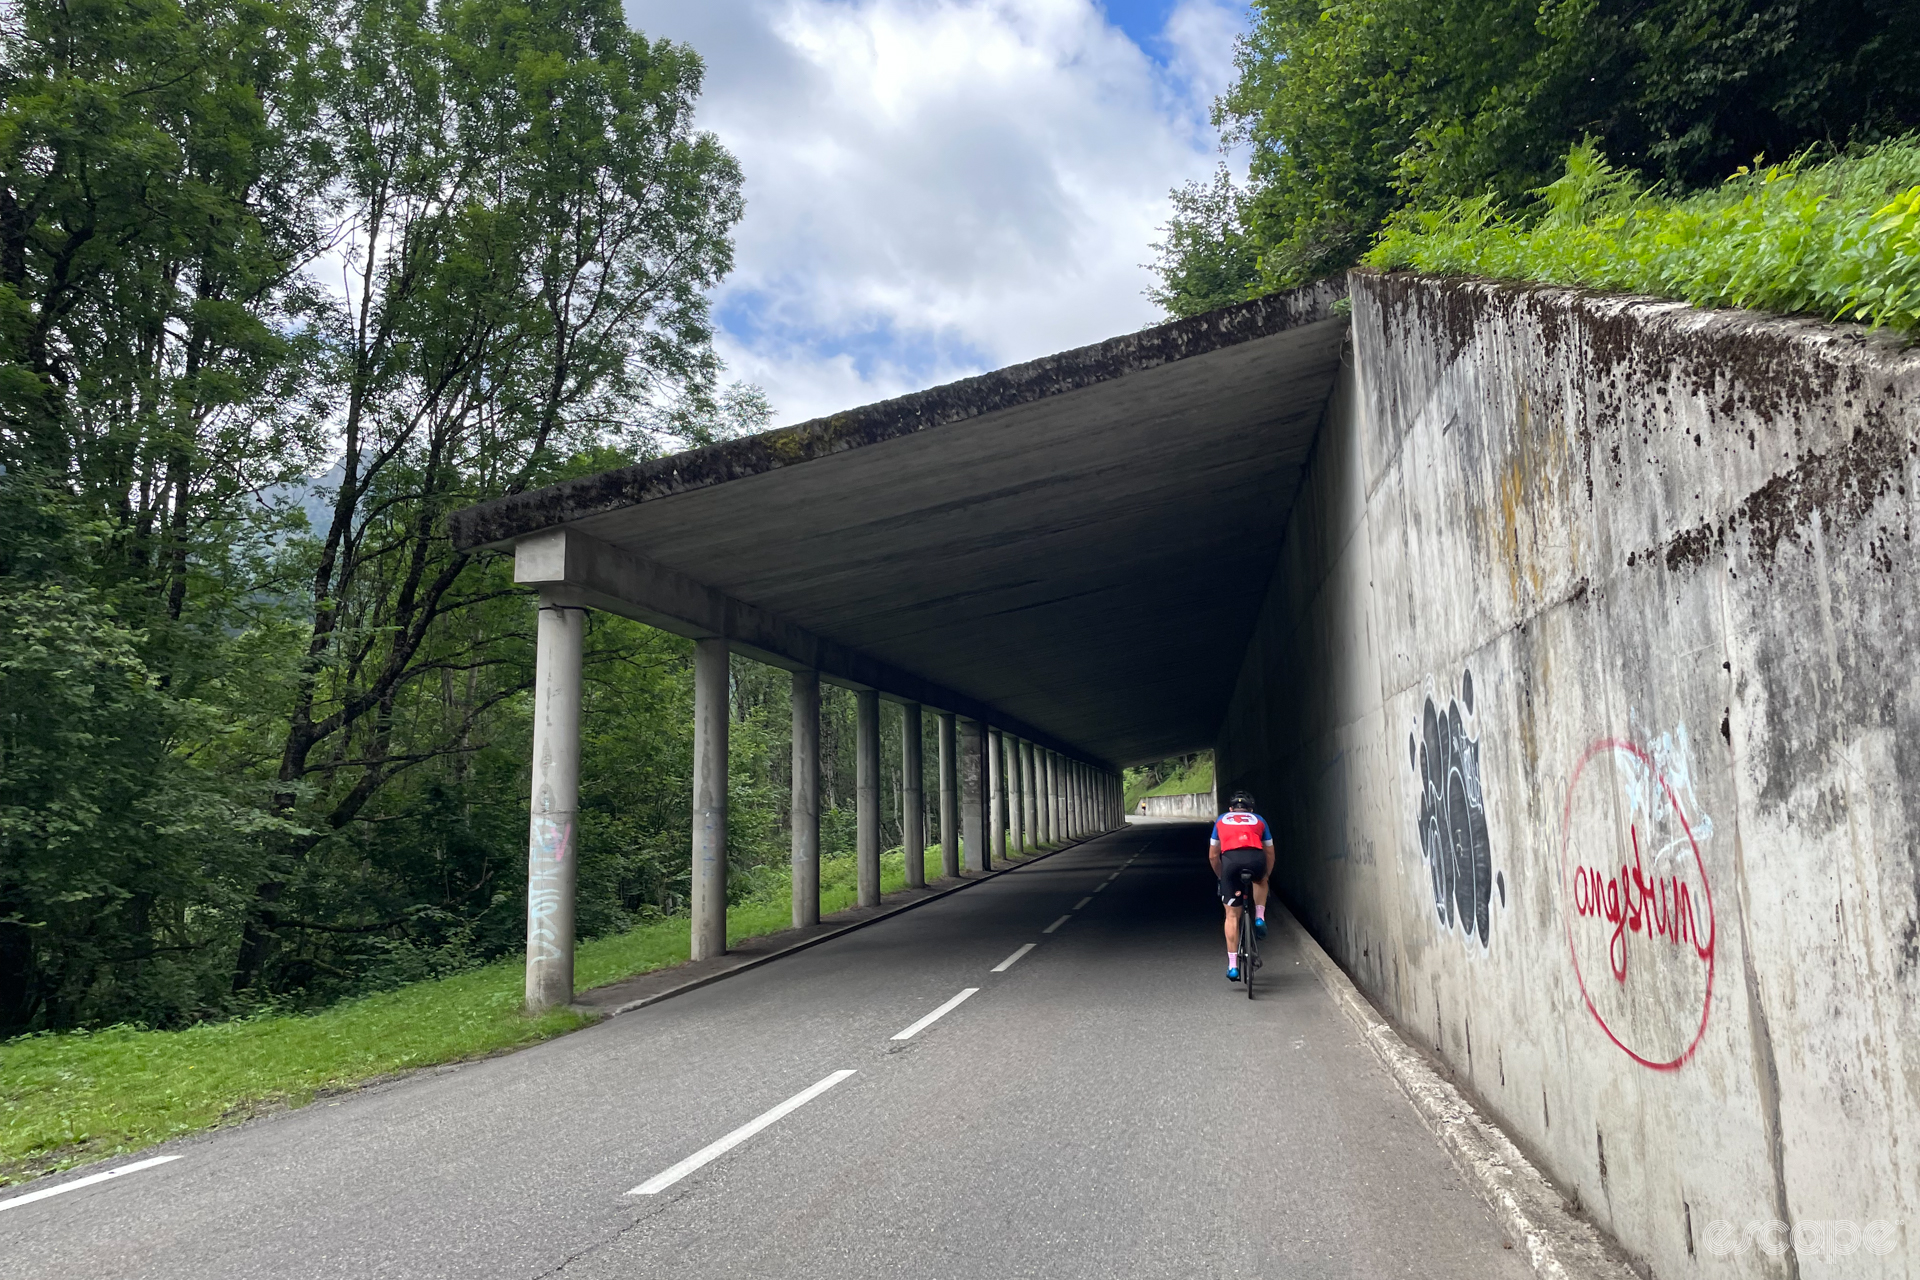 A cyclist enters a tunnel built for avalanche control on the climb up the Tourmalet. There is a tall concrete wall to the uphill side supporting a roof, and the downhill side is open, with only support columns.